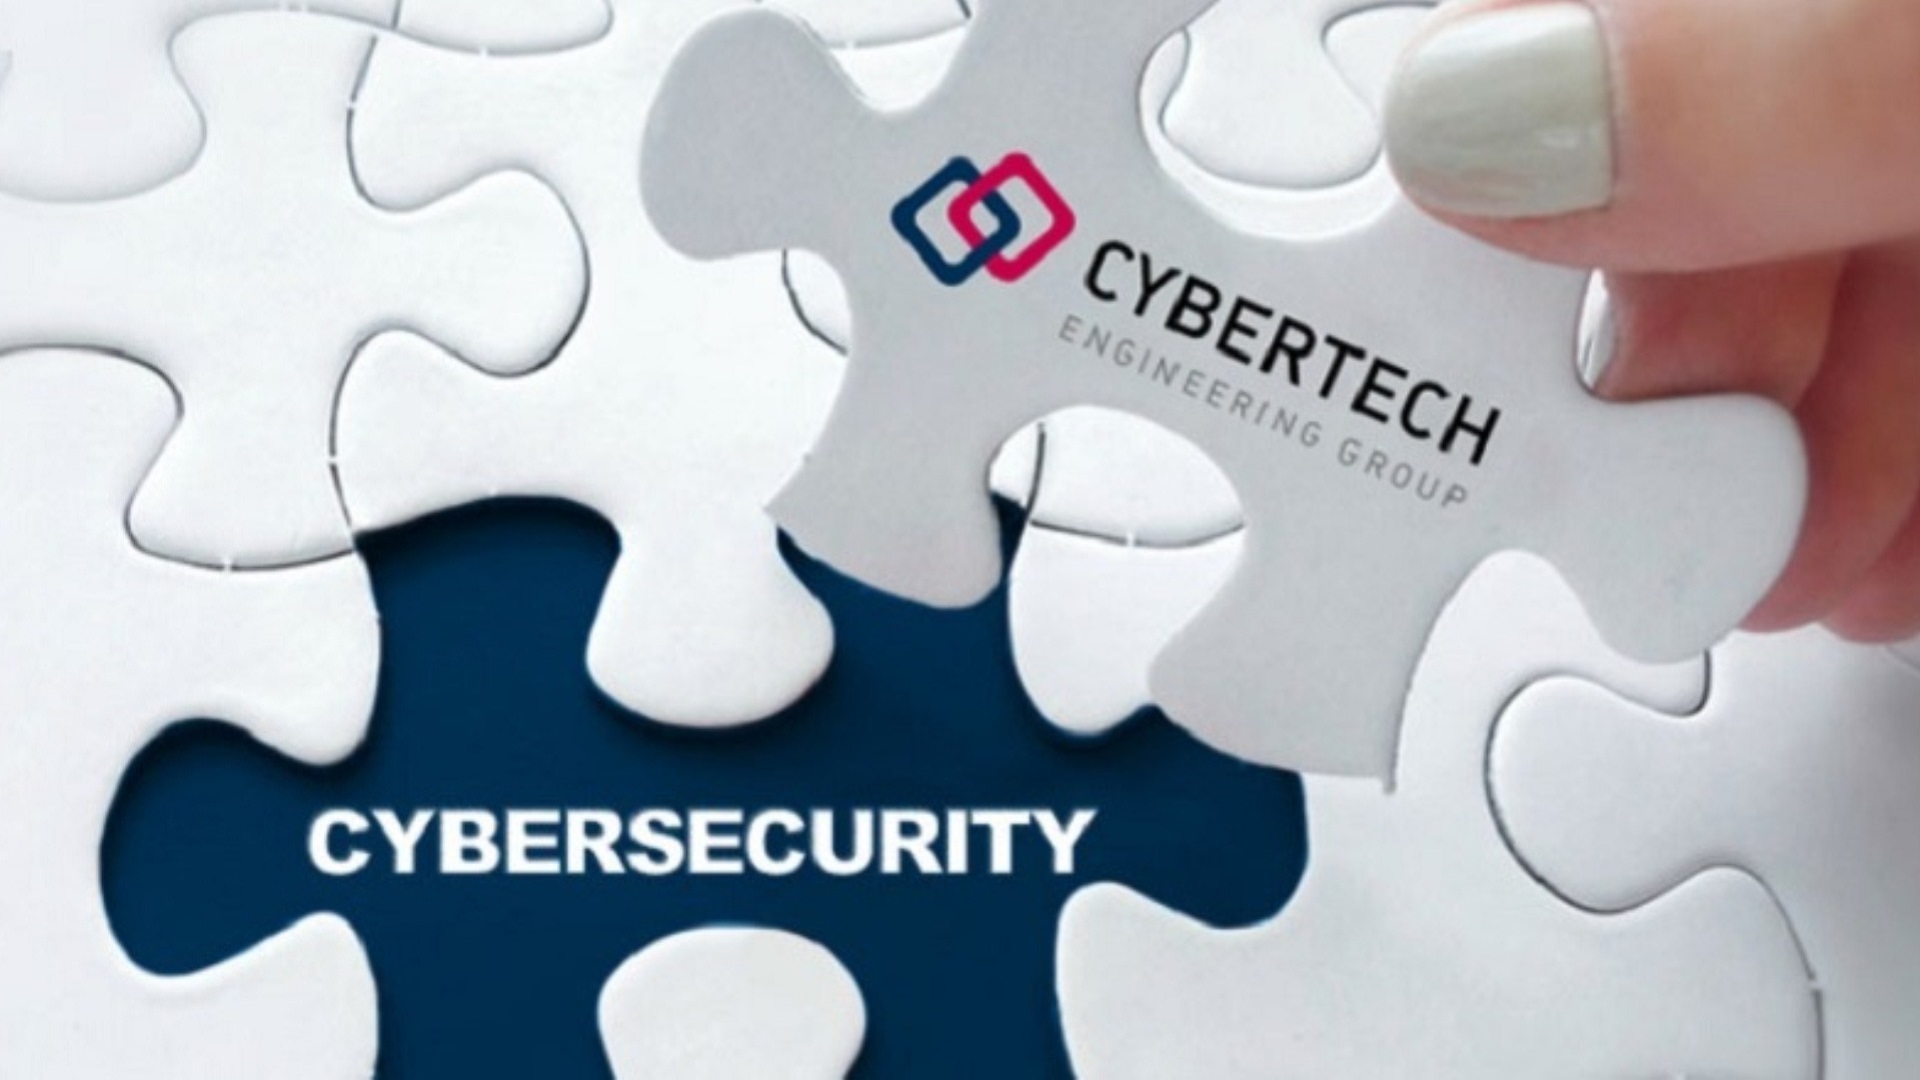 Cybertech (Engineering Group) protects hospitals